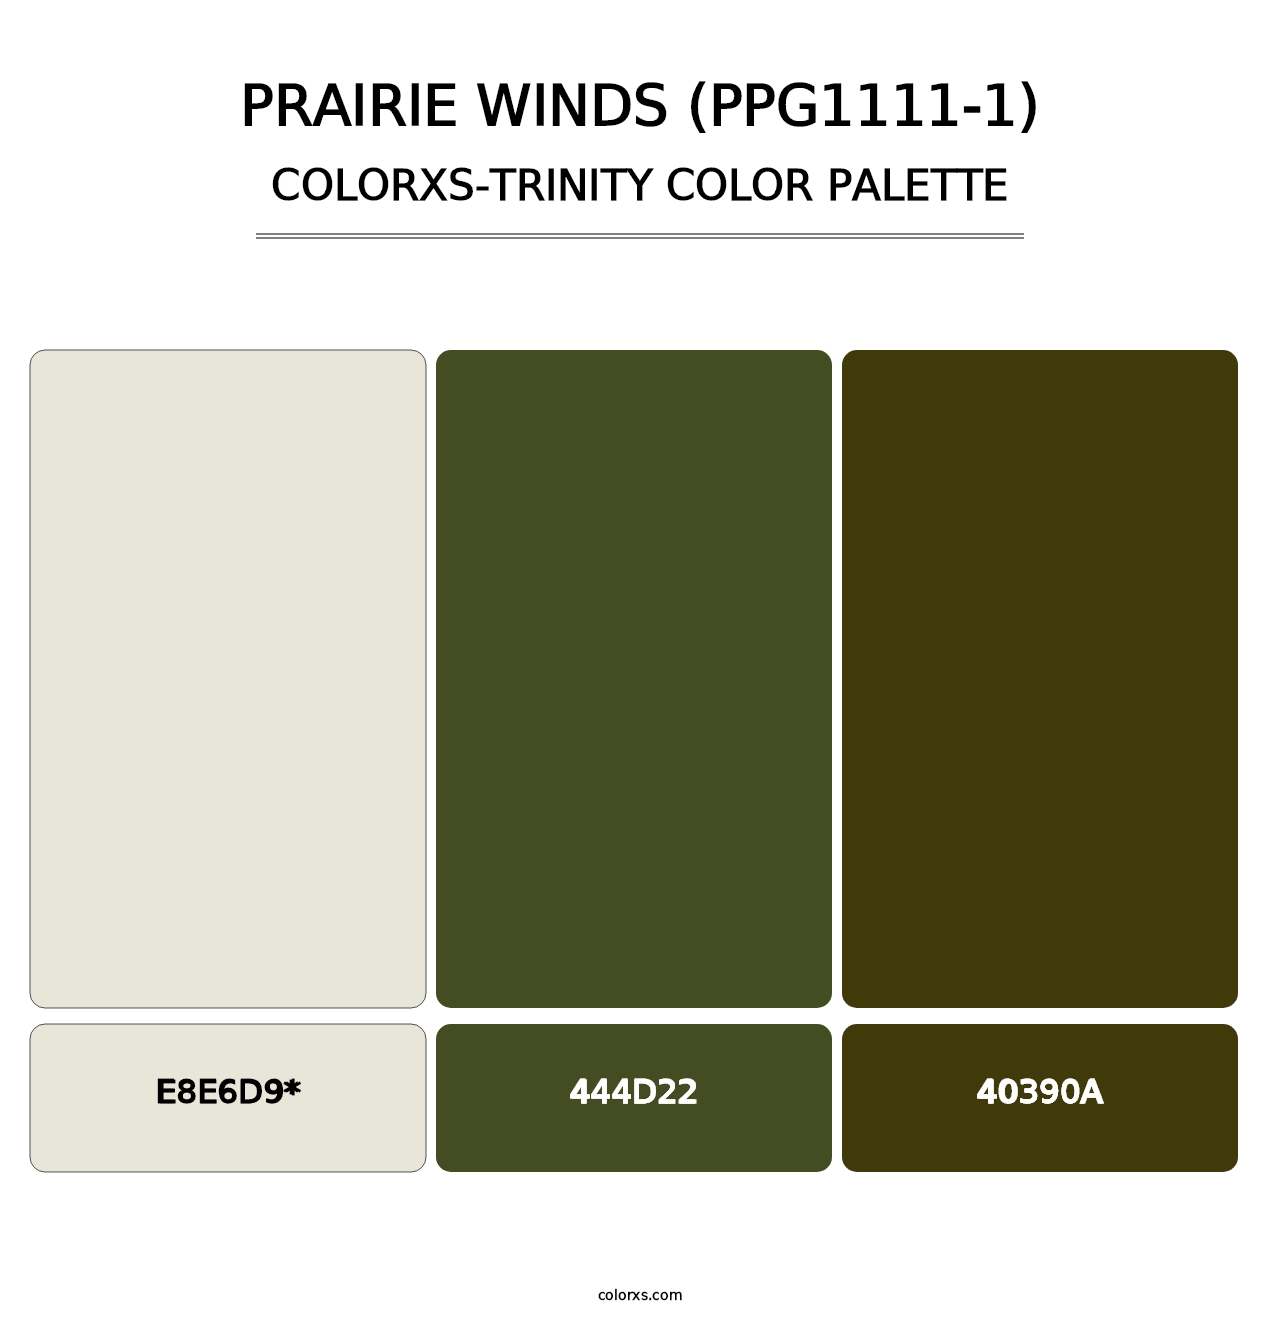 Prairie Winds (PPG1111-1) - Colorxs Trinity Palette